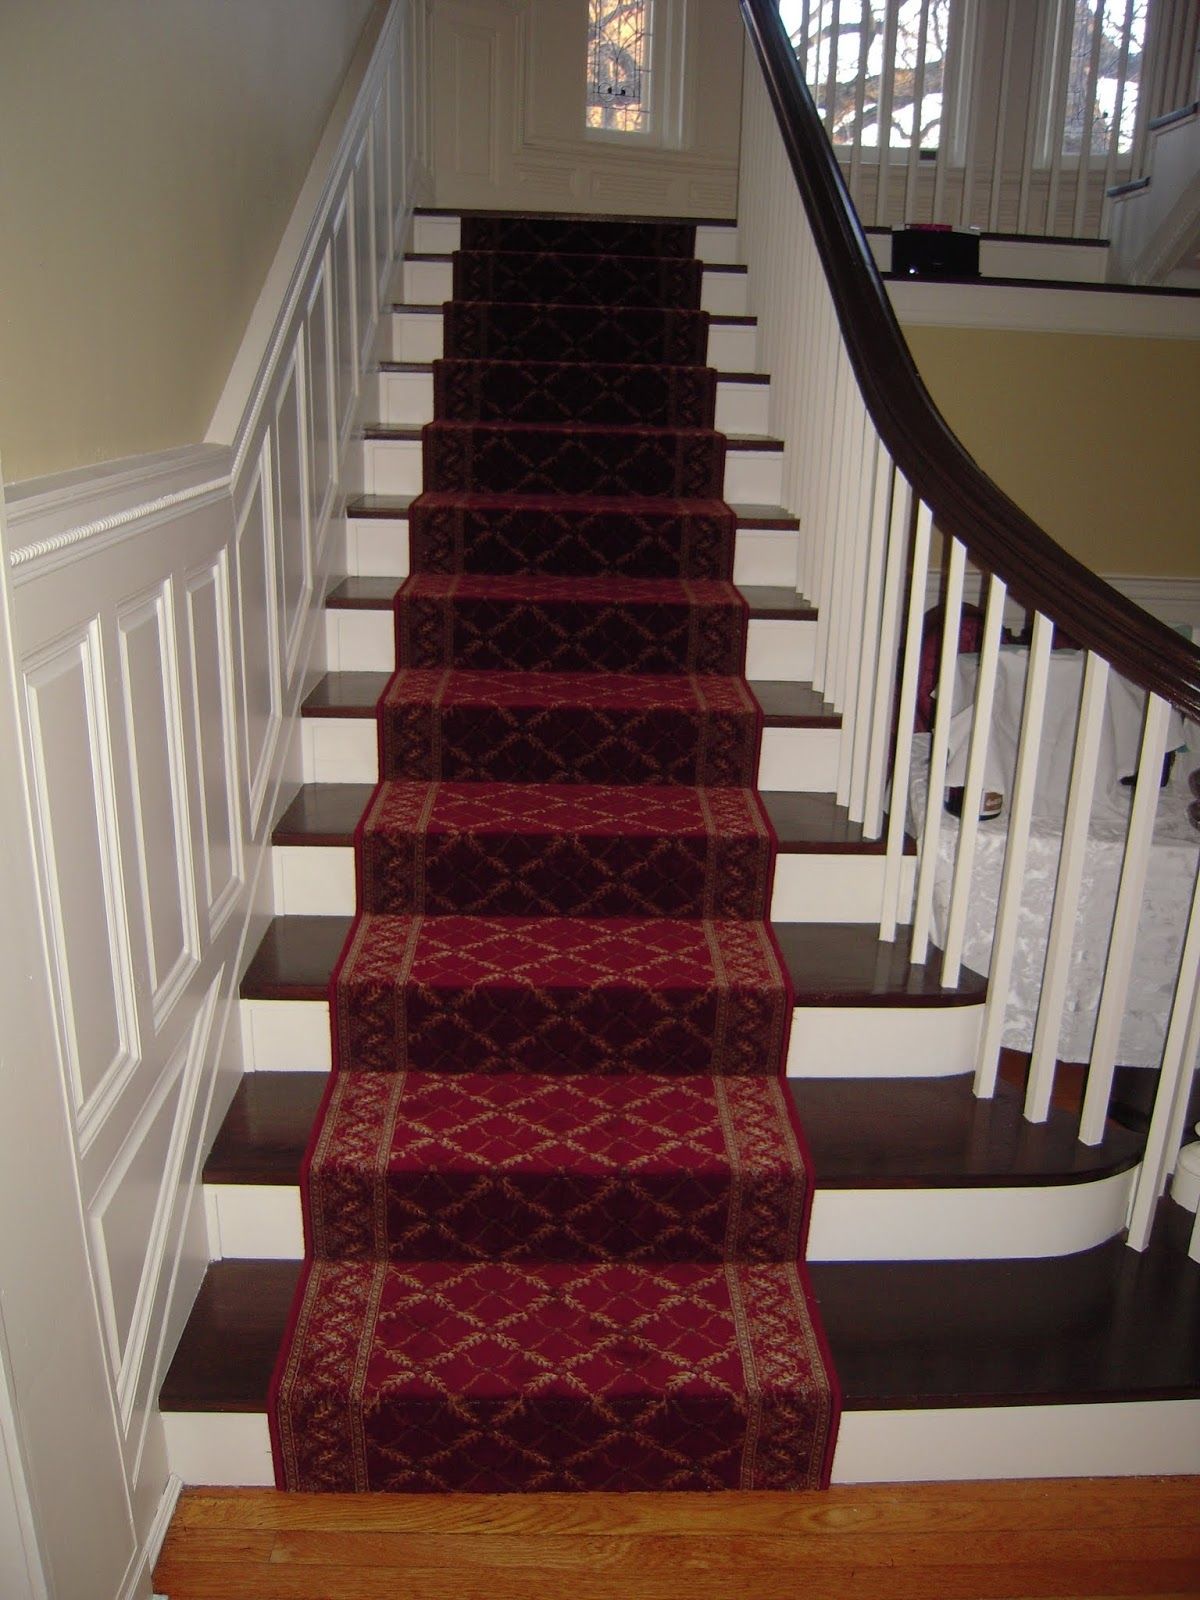 Carpet Runner Stairs With Regard To Hallway Carpet Runners By The Foot (View 19 of 20)